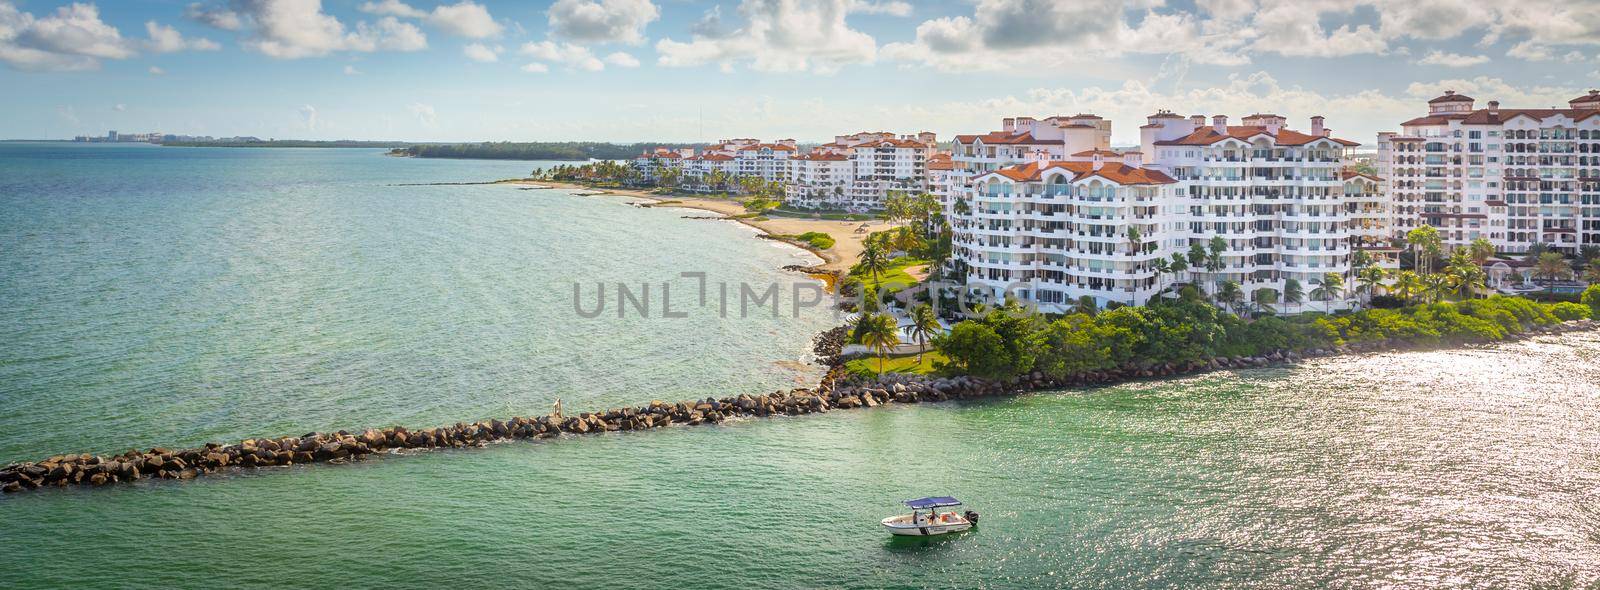 MIAMI, USA - SEPTEMBER 06, 2014 :View of apartments in Fisher Island on September 06, 2014 in Miami.